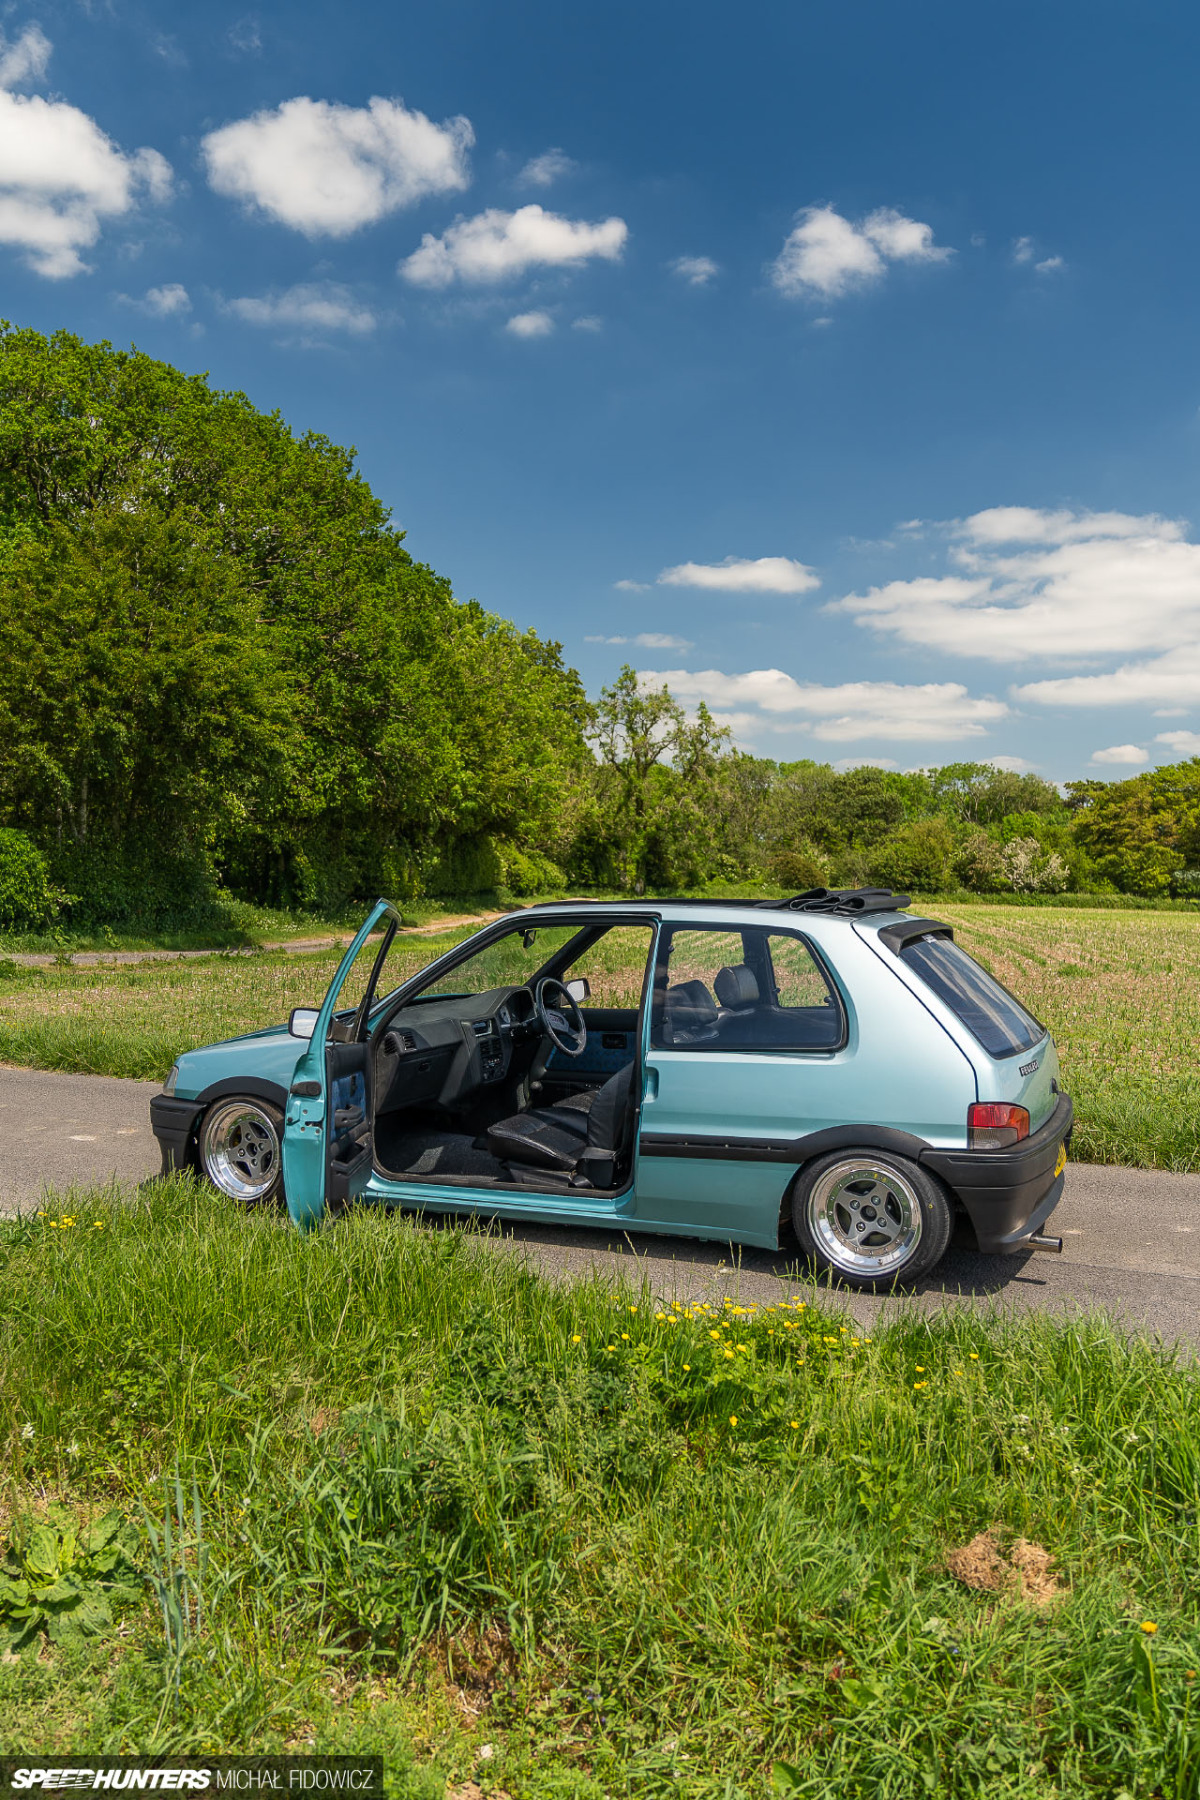 Homegrown, Grassroots Car Joy With A Peugeot 106 - Speedhunters